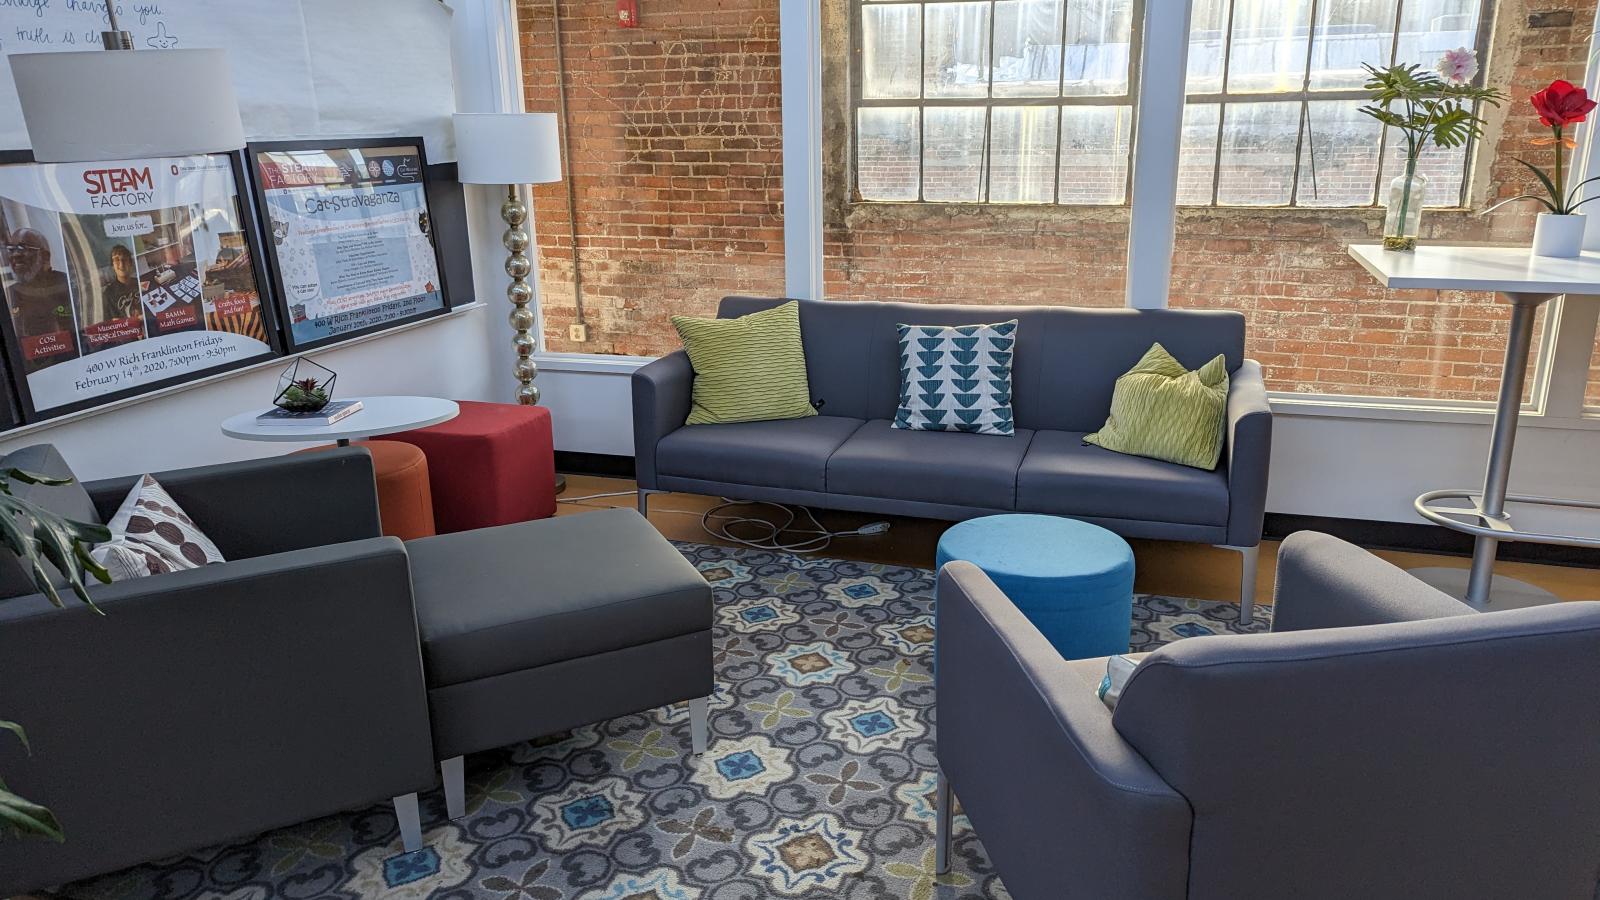 A small breakout area in our main space. This area features comfortable couch seating for multiple people.